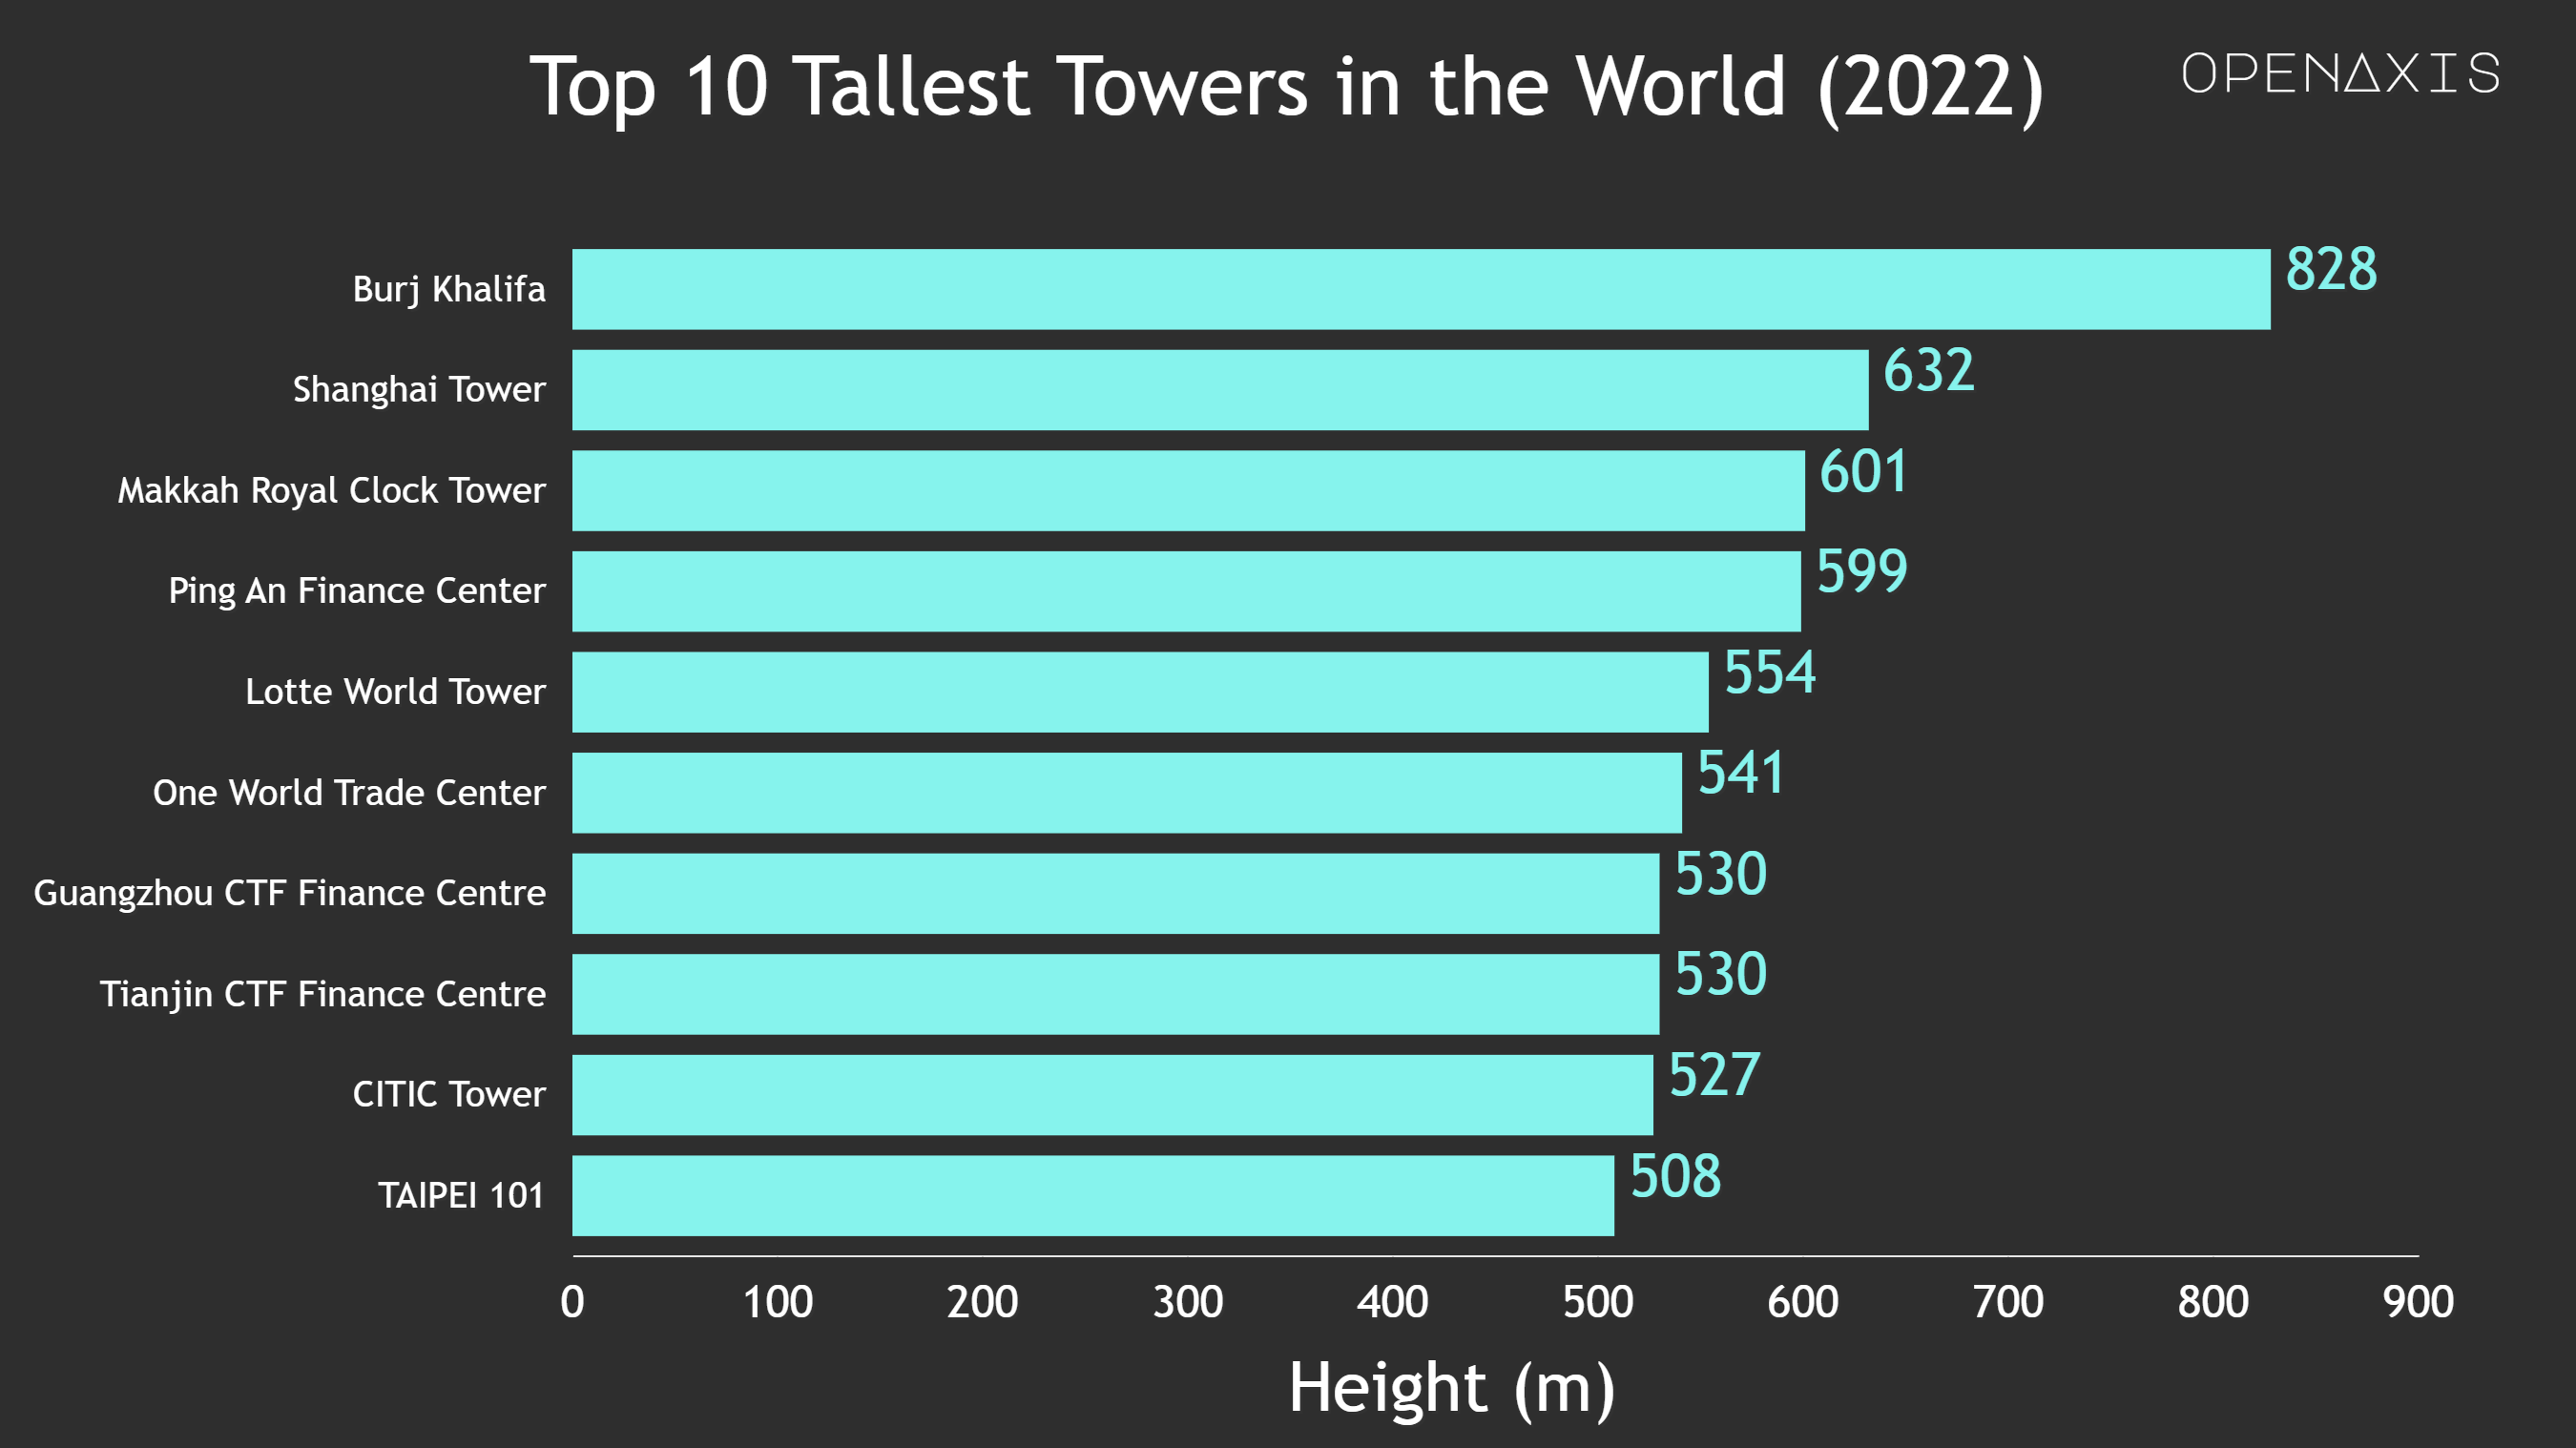 "Top 10 Tallest Towers in the World (2022)"